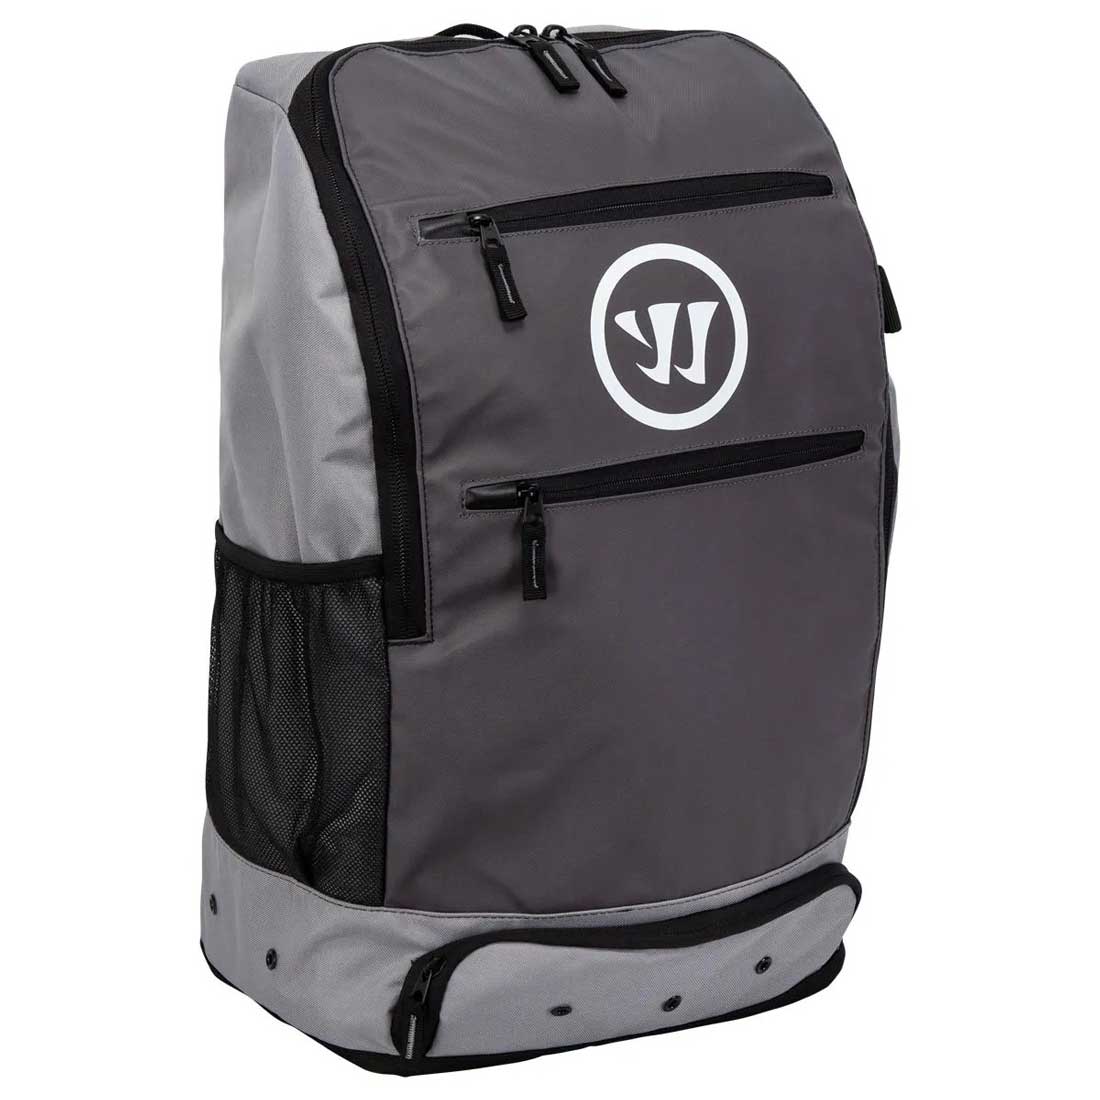 Full picture of the grey Warrior Jet Pack Max Multipurpose Backpack